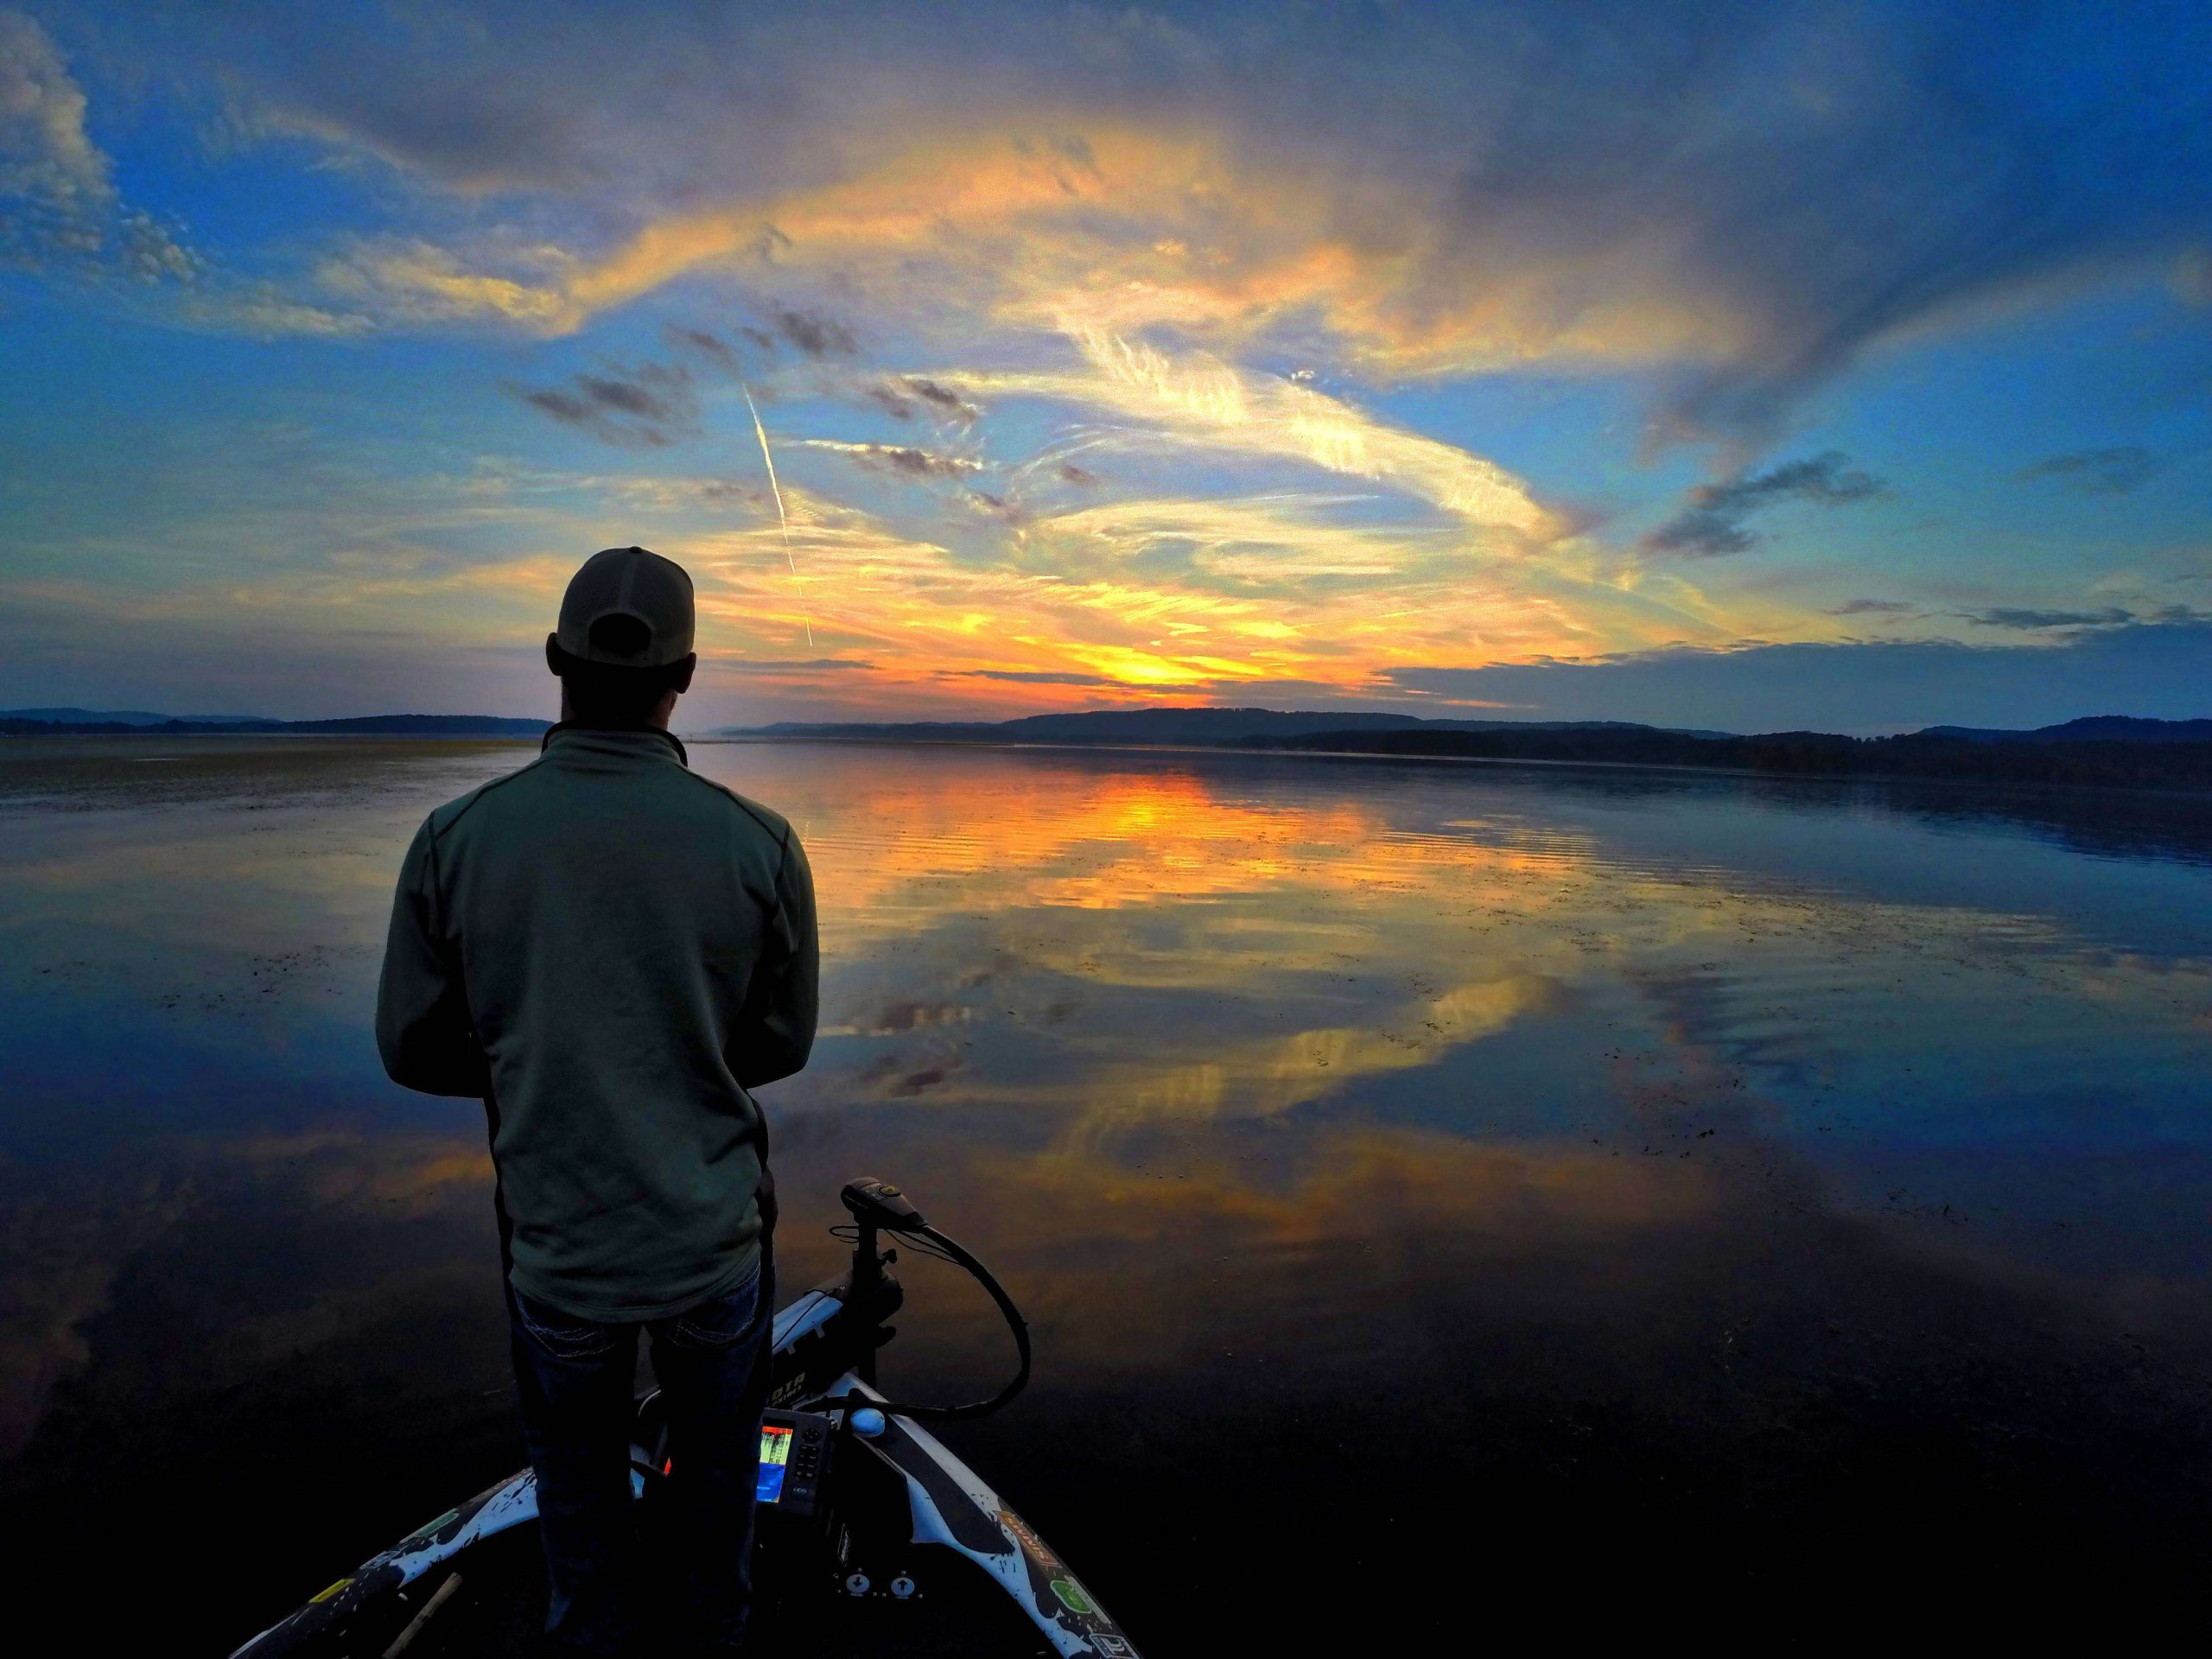 Palaniuk captured this photo on his GoPro camera as the sun was setting during a pre-practice day at Lake Guntersville. He entitled this picture, 